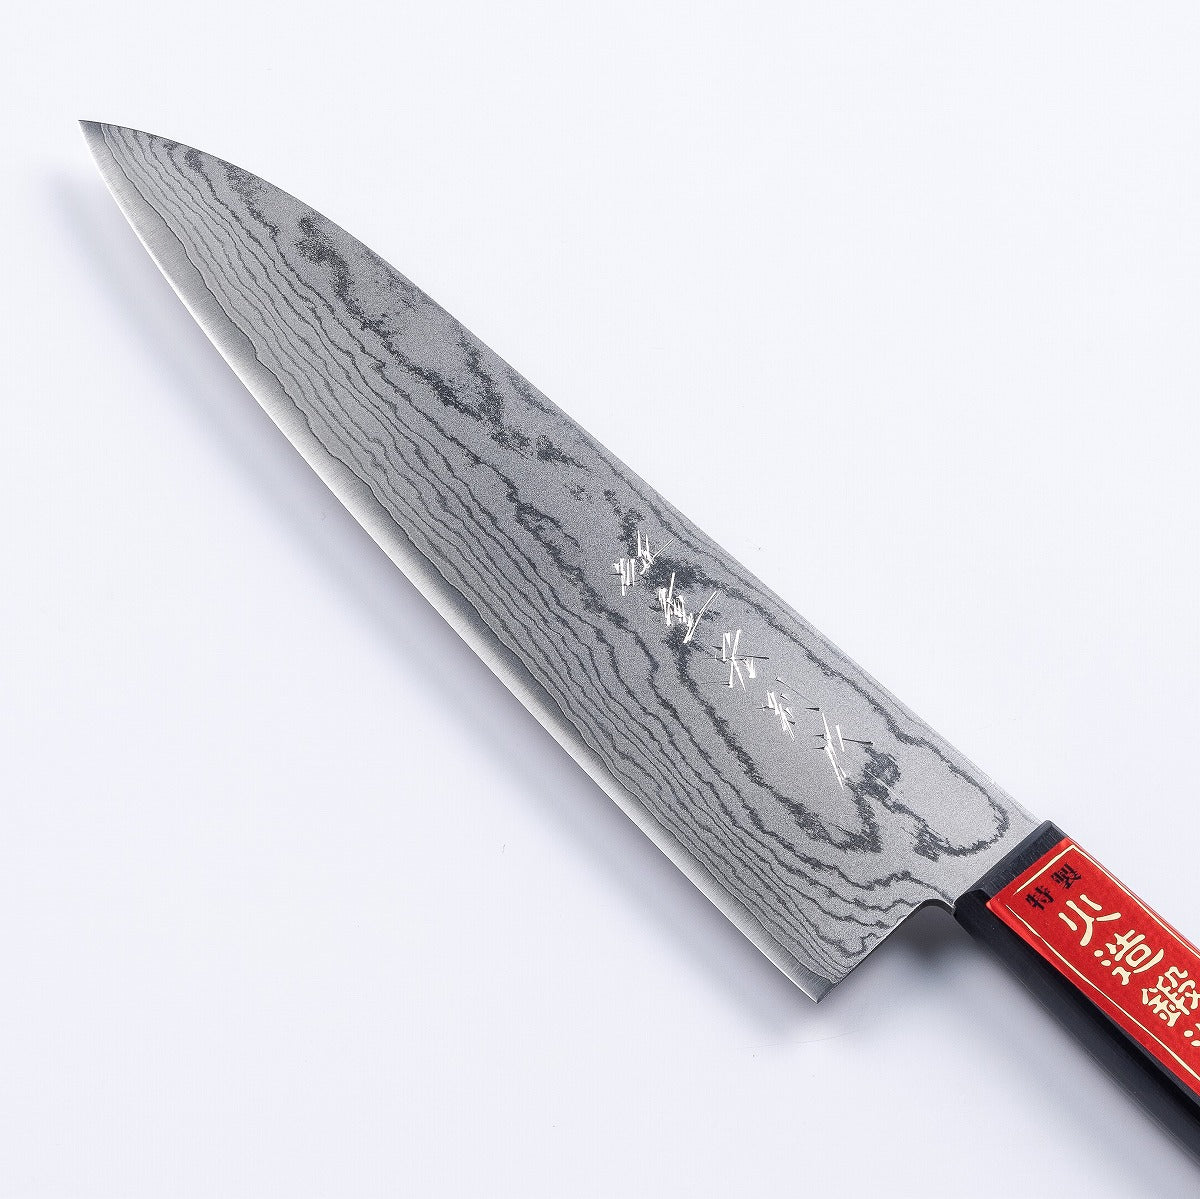 "SHIGEHIRO SPECIAL" Gyuto Special Edition (Chef's Knife) VG10 Damascus, 210mm